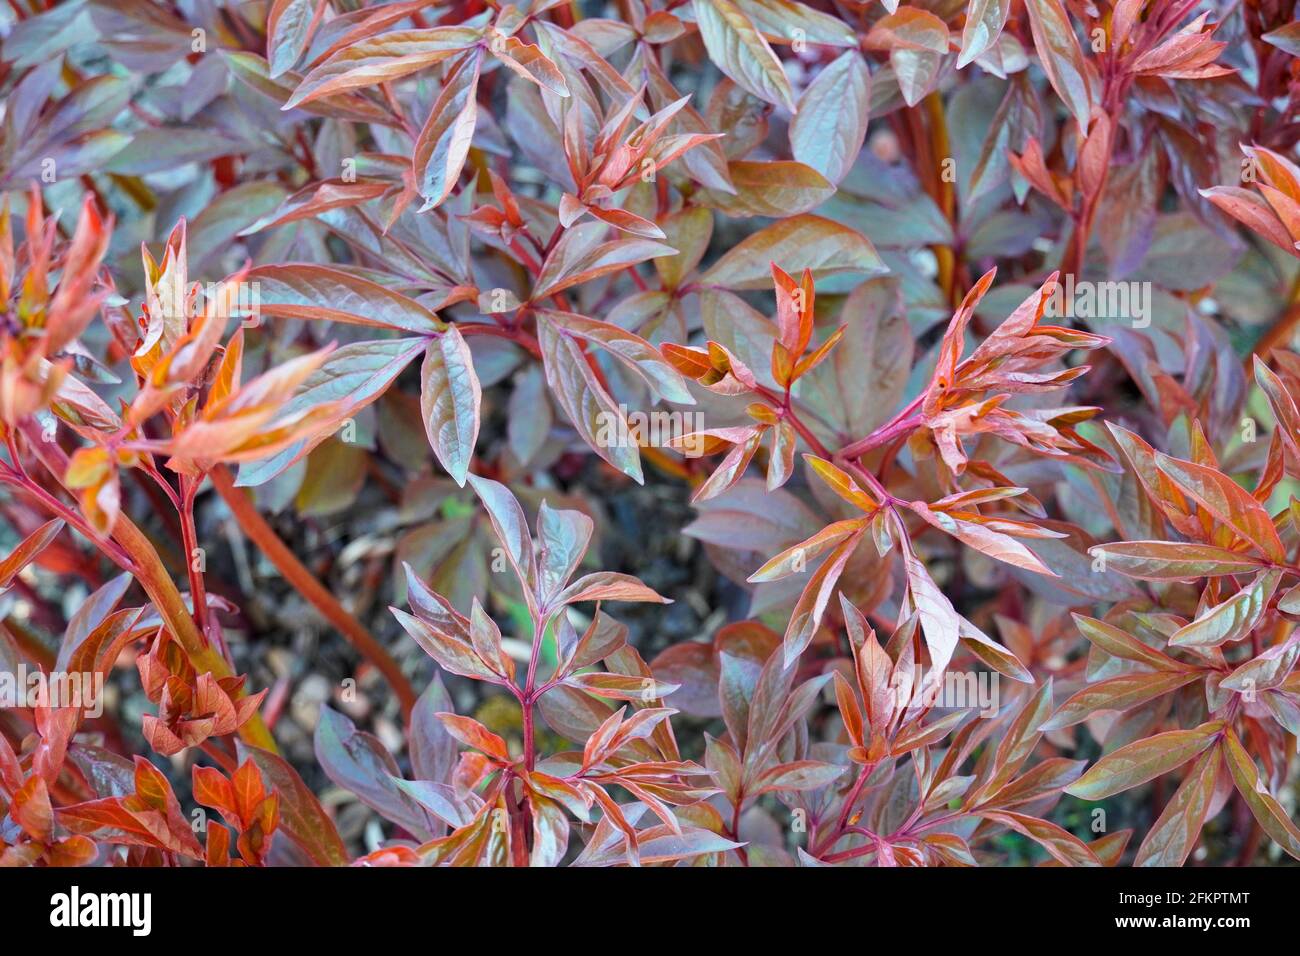 Bed with green-red leaves of a peony without flowers in the early growth phase. Perennials in the garden in spring. Stock Photo